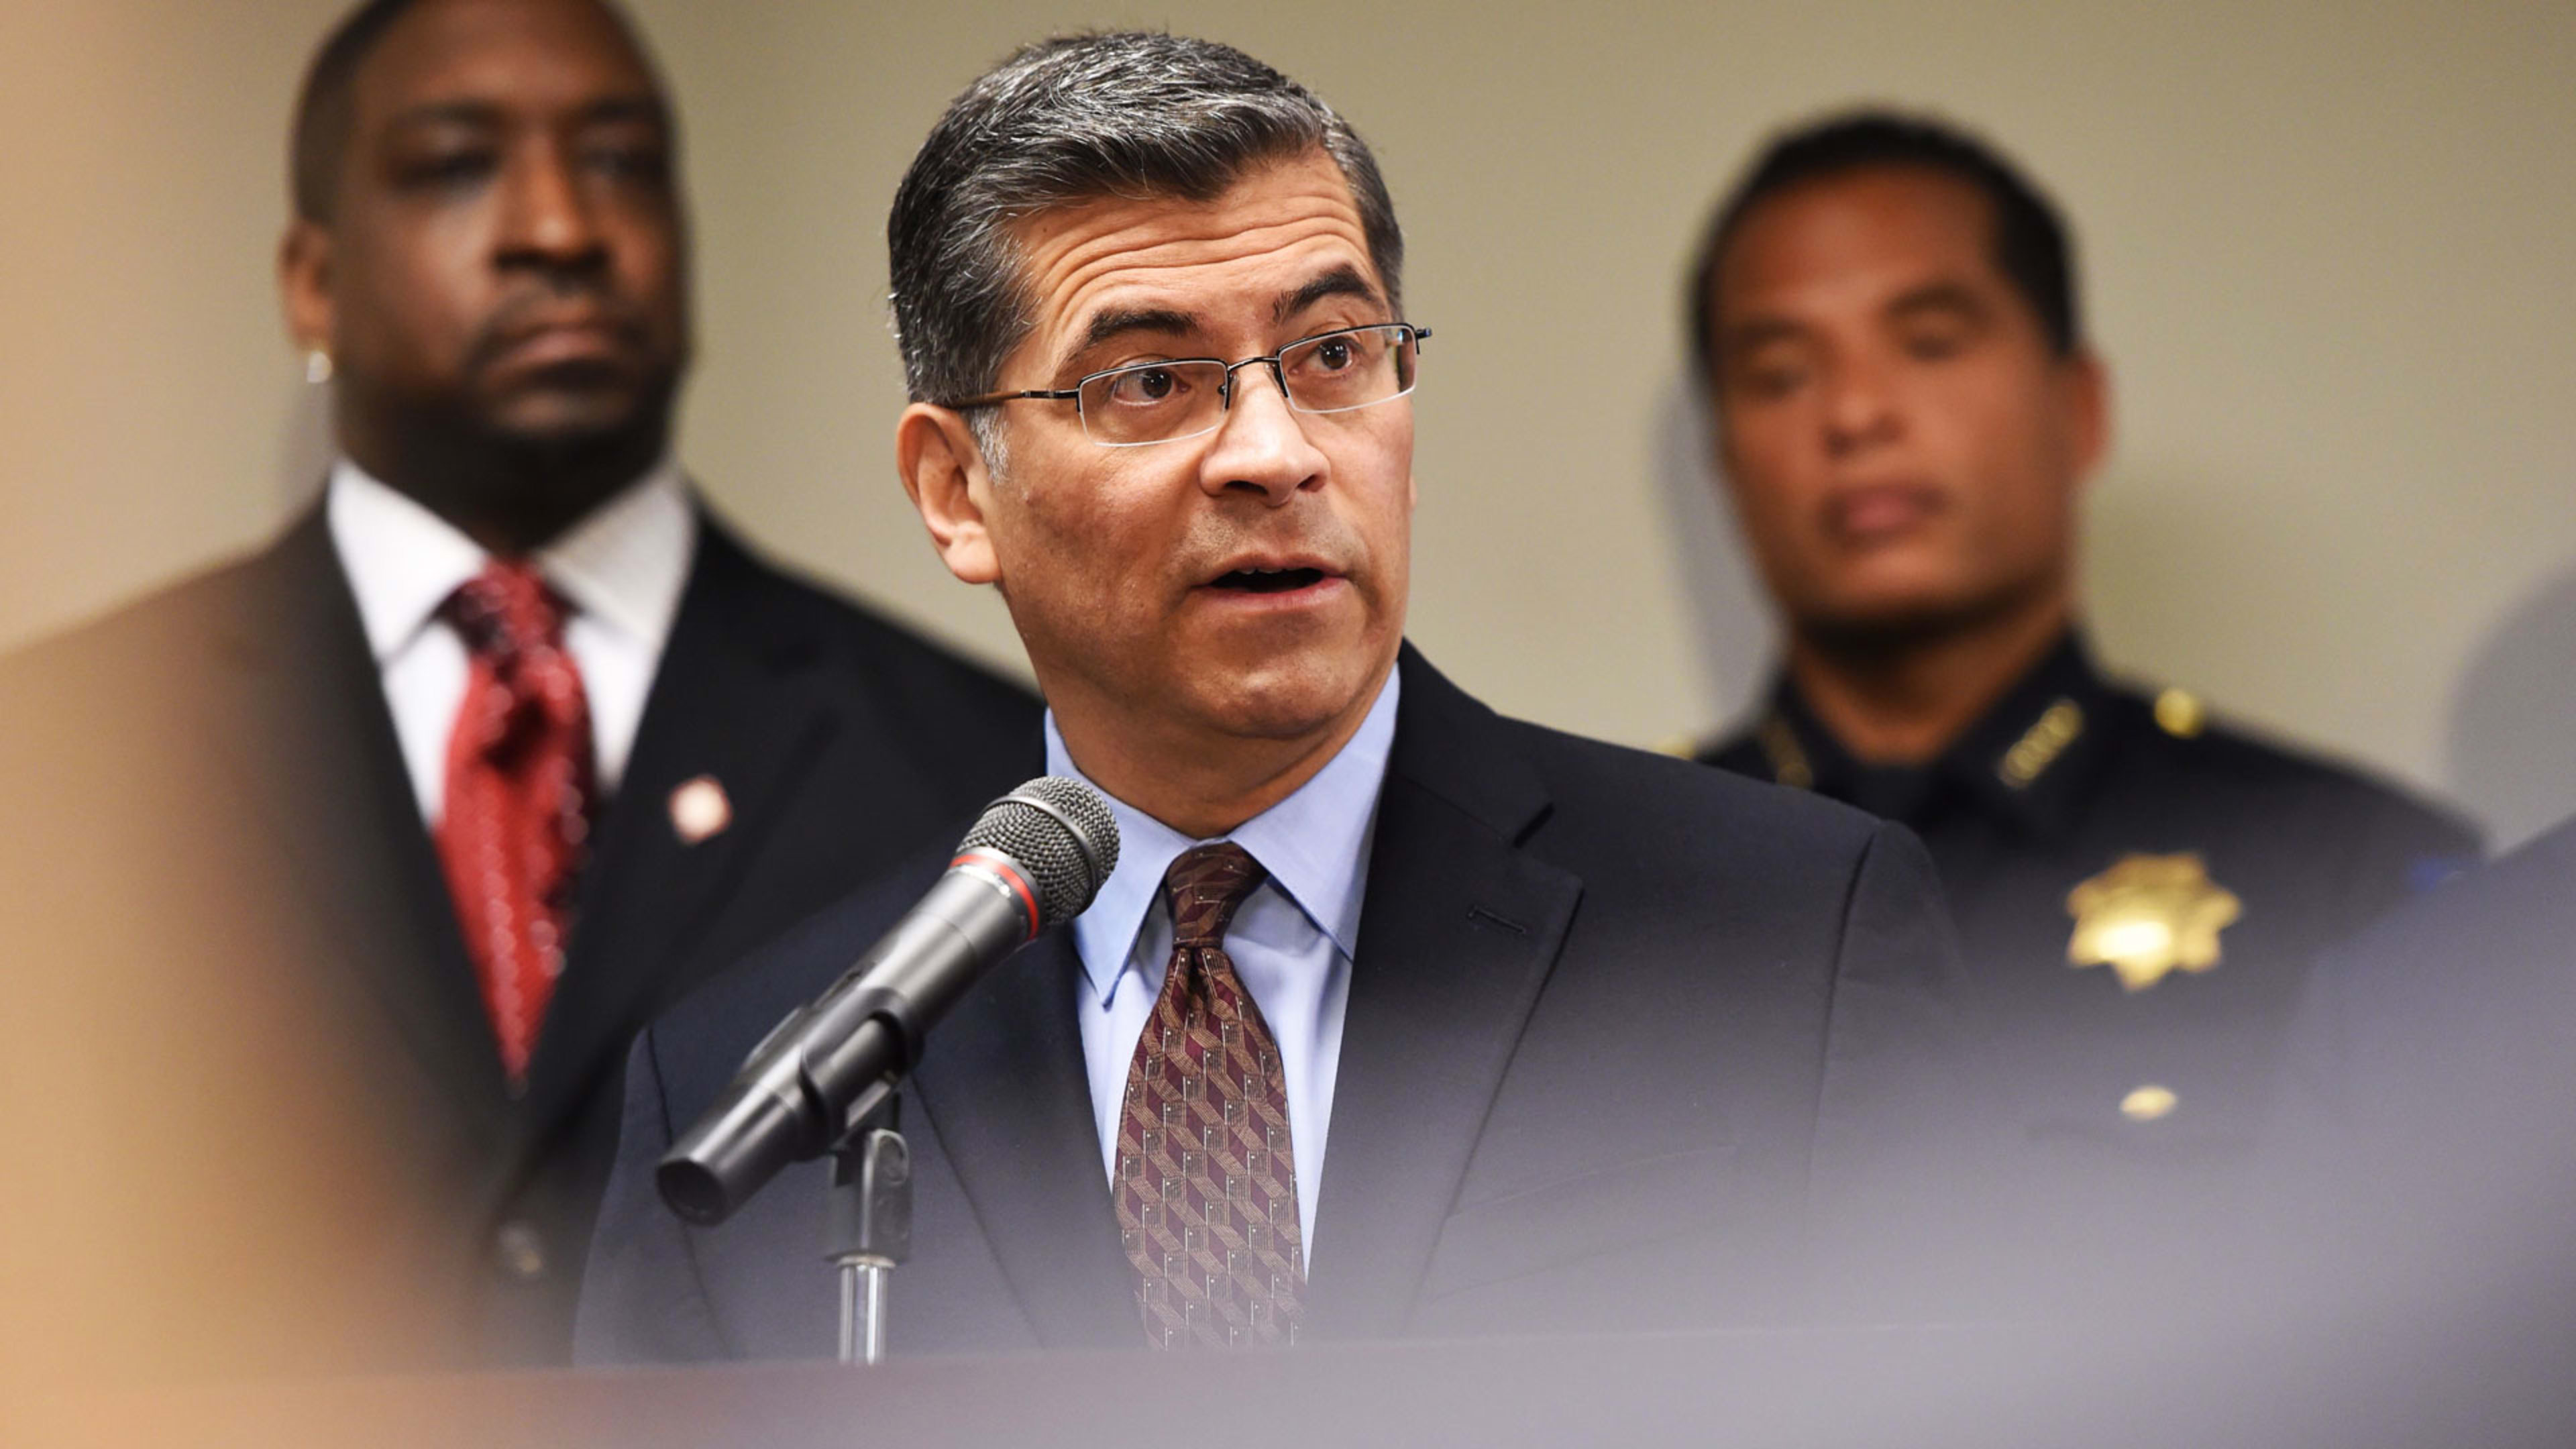 Records reveal theft and lies by the head of an elite California drug task force